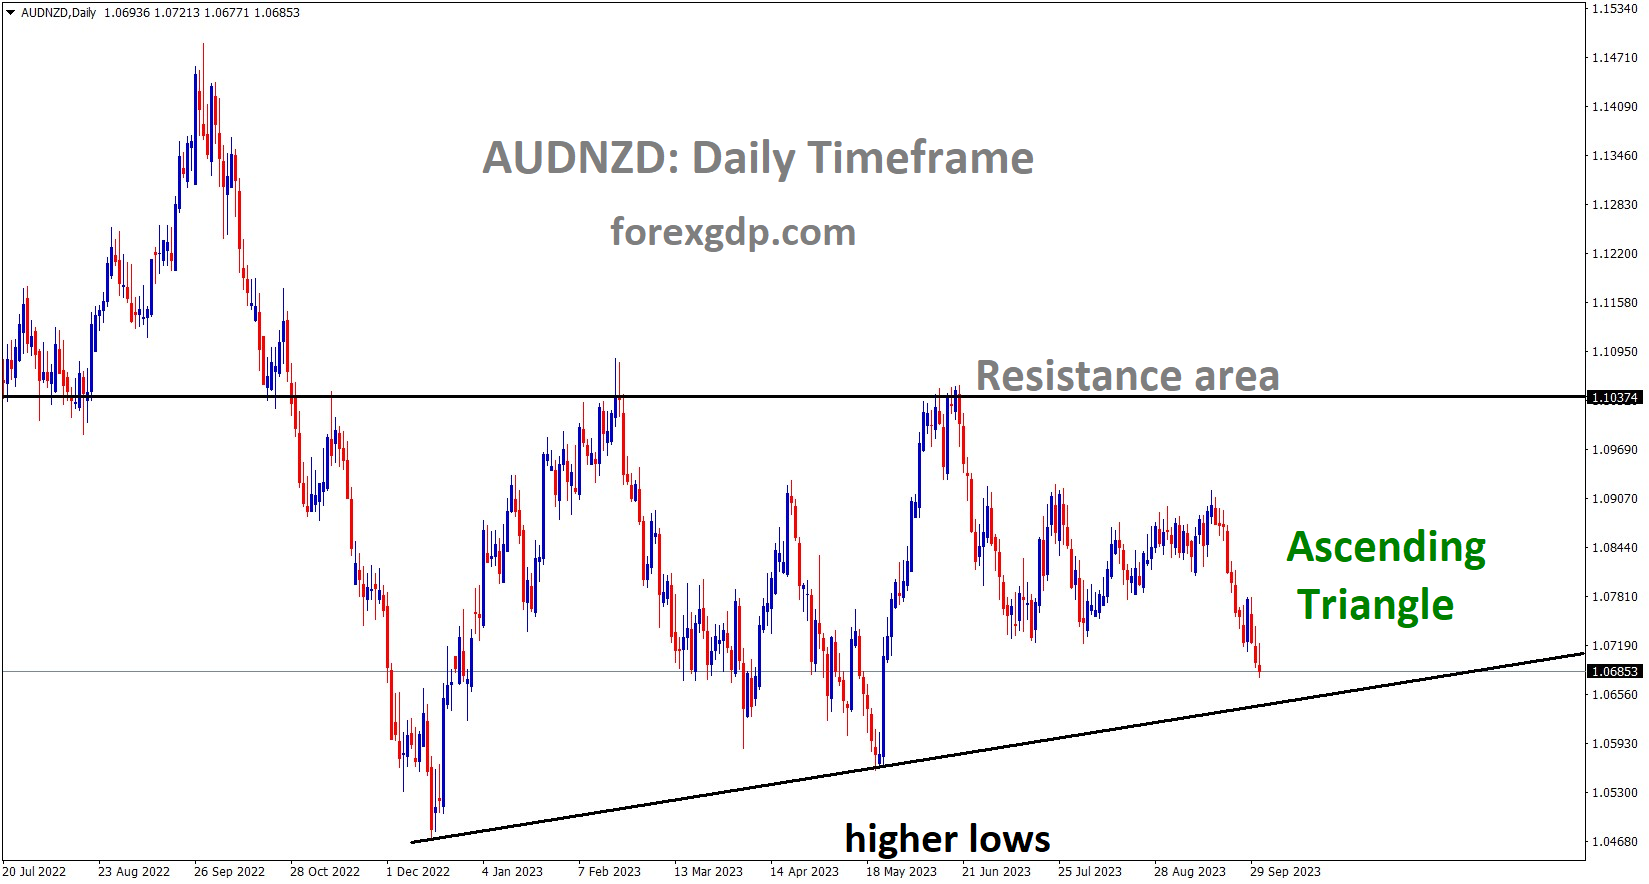 AUDNZD is moving in an Ascending triangle pattern and the market has reached the higher low area of the pattern